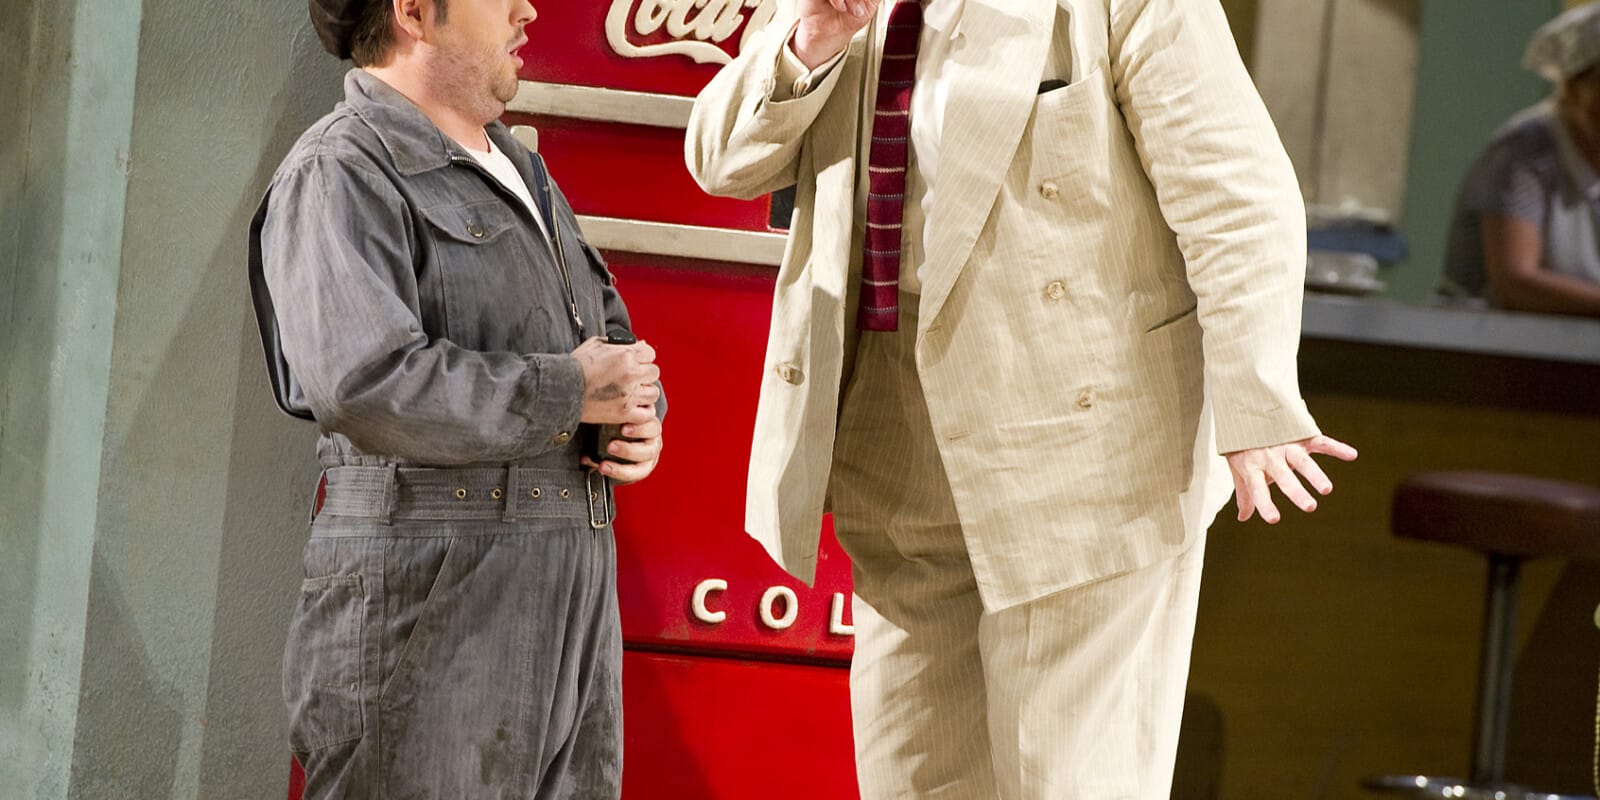 A man in a cream suit interacts with a man in a grey boiler suit and jacket by a vending machine